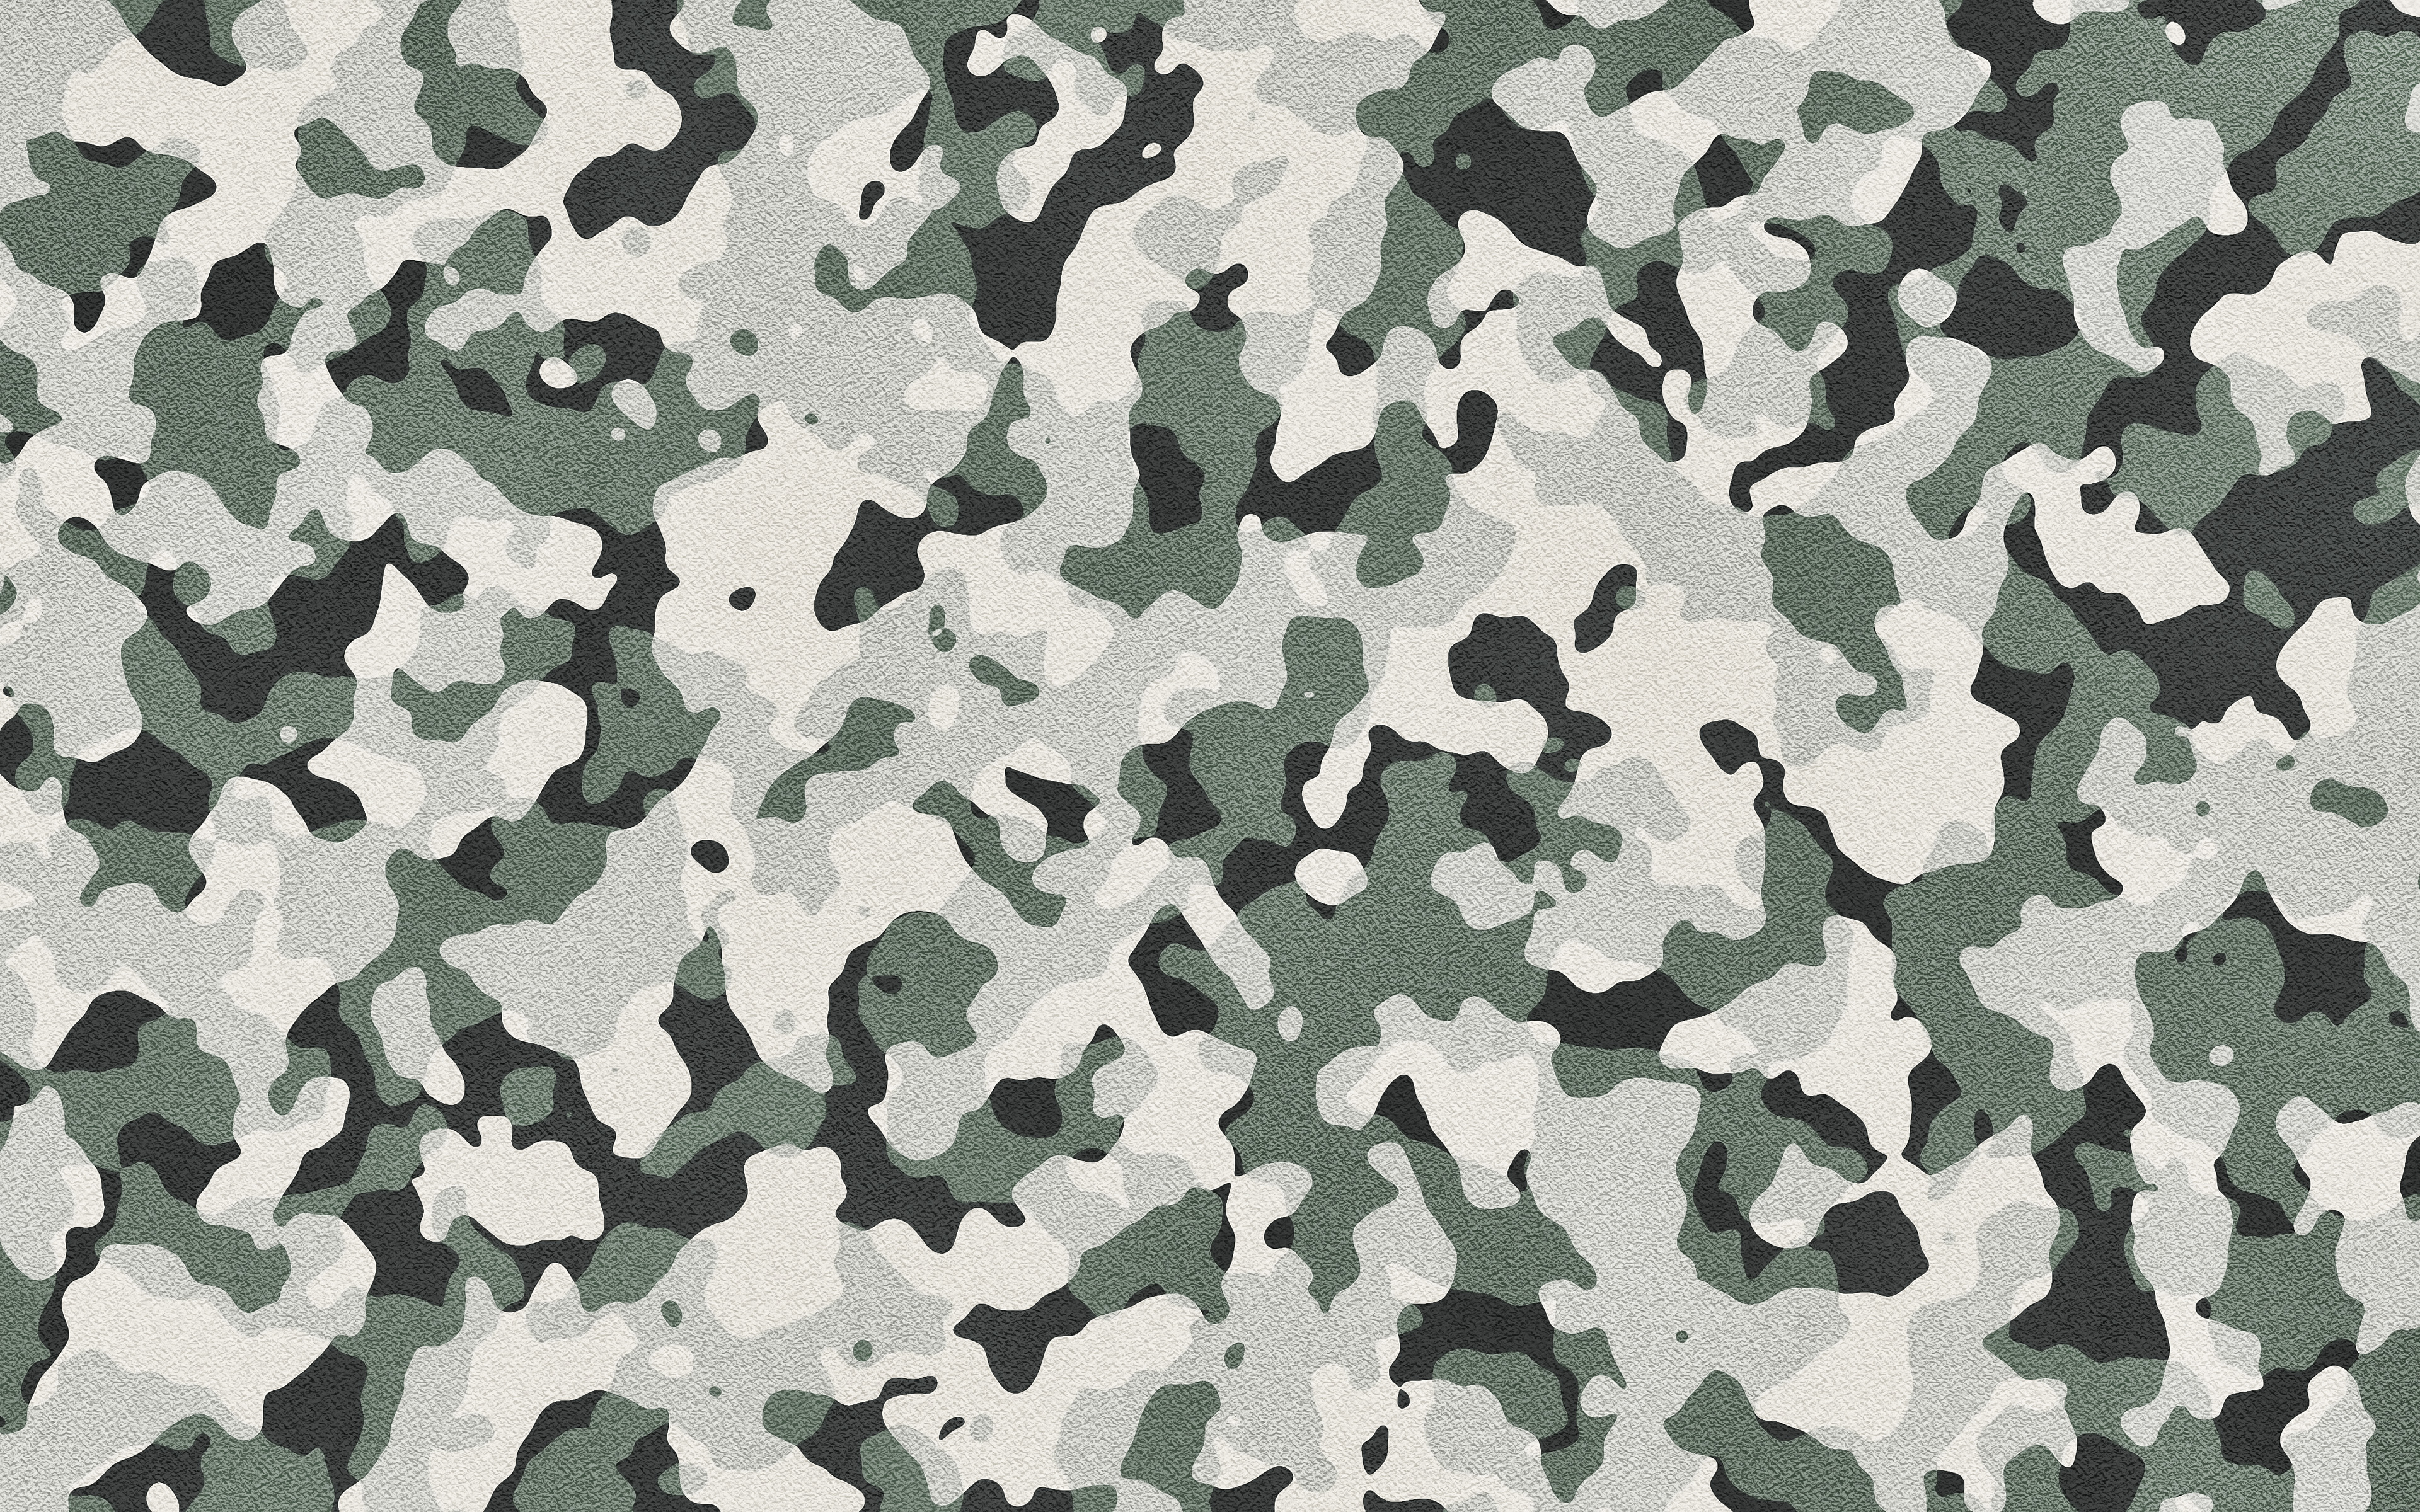 Download wallpaper winter camouflage, 4k, camouflage pattern, military camouflage, gray background, white camouflage for desktop with resolution 3840x2400. High Quality HD picture wallpaper